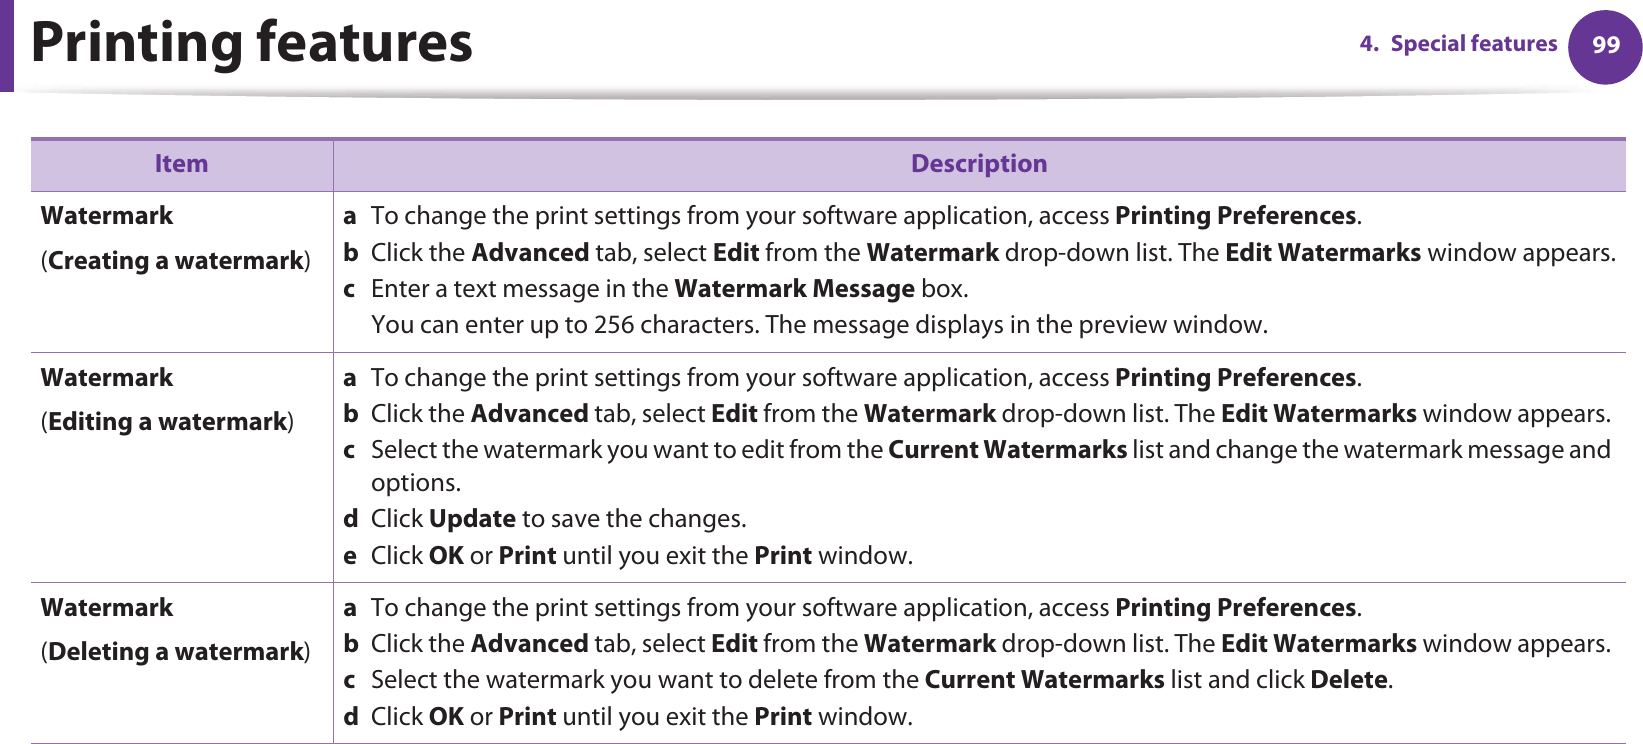 Printing features 994. Special featuresWatermark(Creating a watermark)a  To change the print settings from your software application, access Printing Preferences.b  Click the Advanced tab, select Edit from the Watermark drop-down list. The Edit Watermarks window appears.c  Enter a text message in the Watermark Message box. You can enter up to 256 characters. The message displays in the preview window.Watermark(Editing a watermark)a  To change the print settings from your software application, access Printing Preferences.b  Click the Advanced tab, select Edit from the Watermark drop-down list. The Edit Watermarks window appears. c  Select the watermark you want to edit from the Current Watermarks list and change the watermark message and options. d  Click Update to save the changes.e  Click OK or Print until you exit the Print window. Watermark(Deleting a watermark)a  To change the print settings from your software application, access Printing Preferences.b  Click the Advanced tab, select Edit from the Watermark drop-down list. The Edit Watermarks window appears. c  Select the watermark you want to delete from the Current Watermarks list and click Delete. d  Click OK or Print until you exit the Print window.Item Description